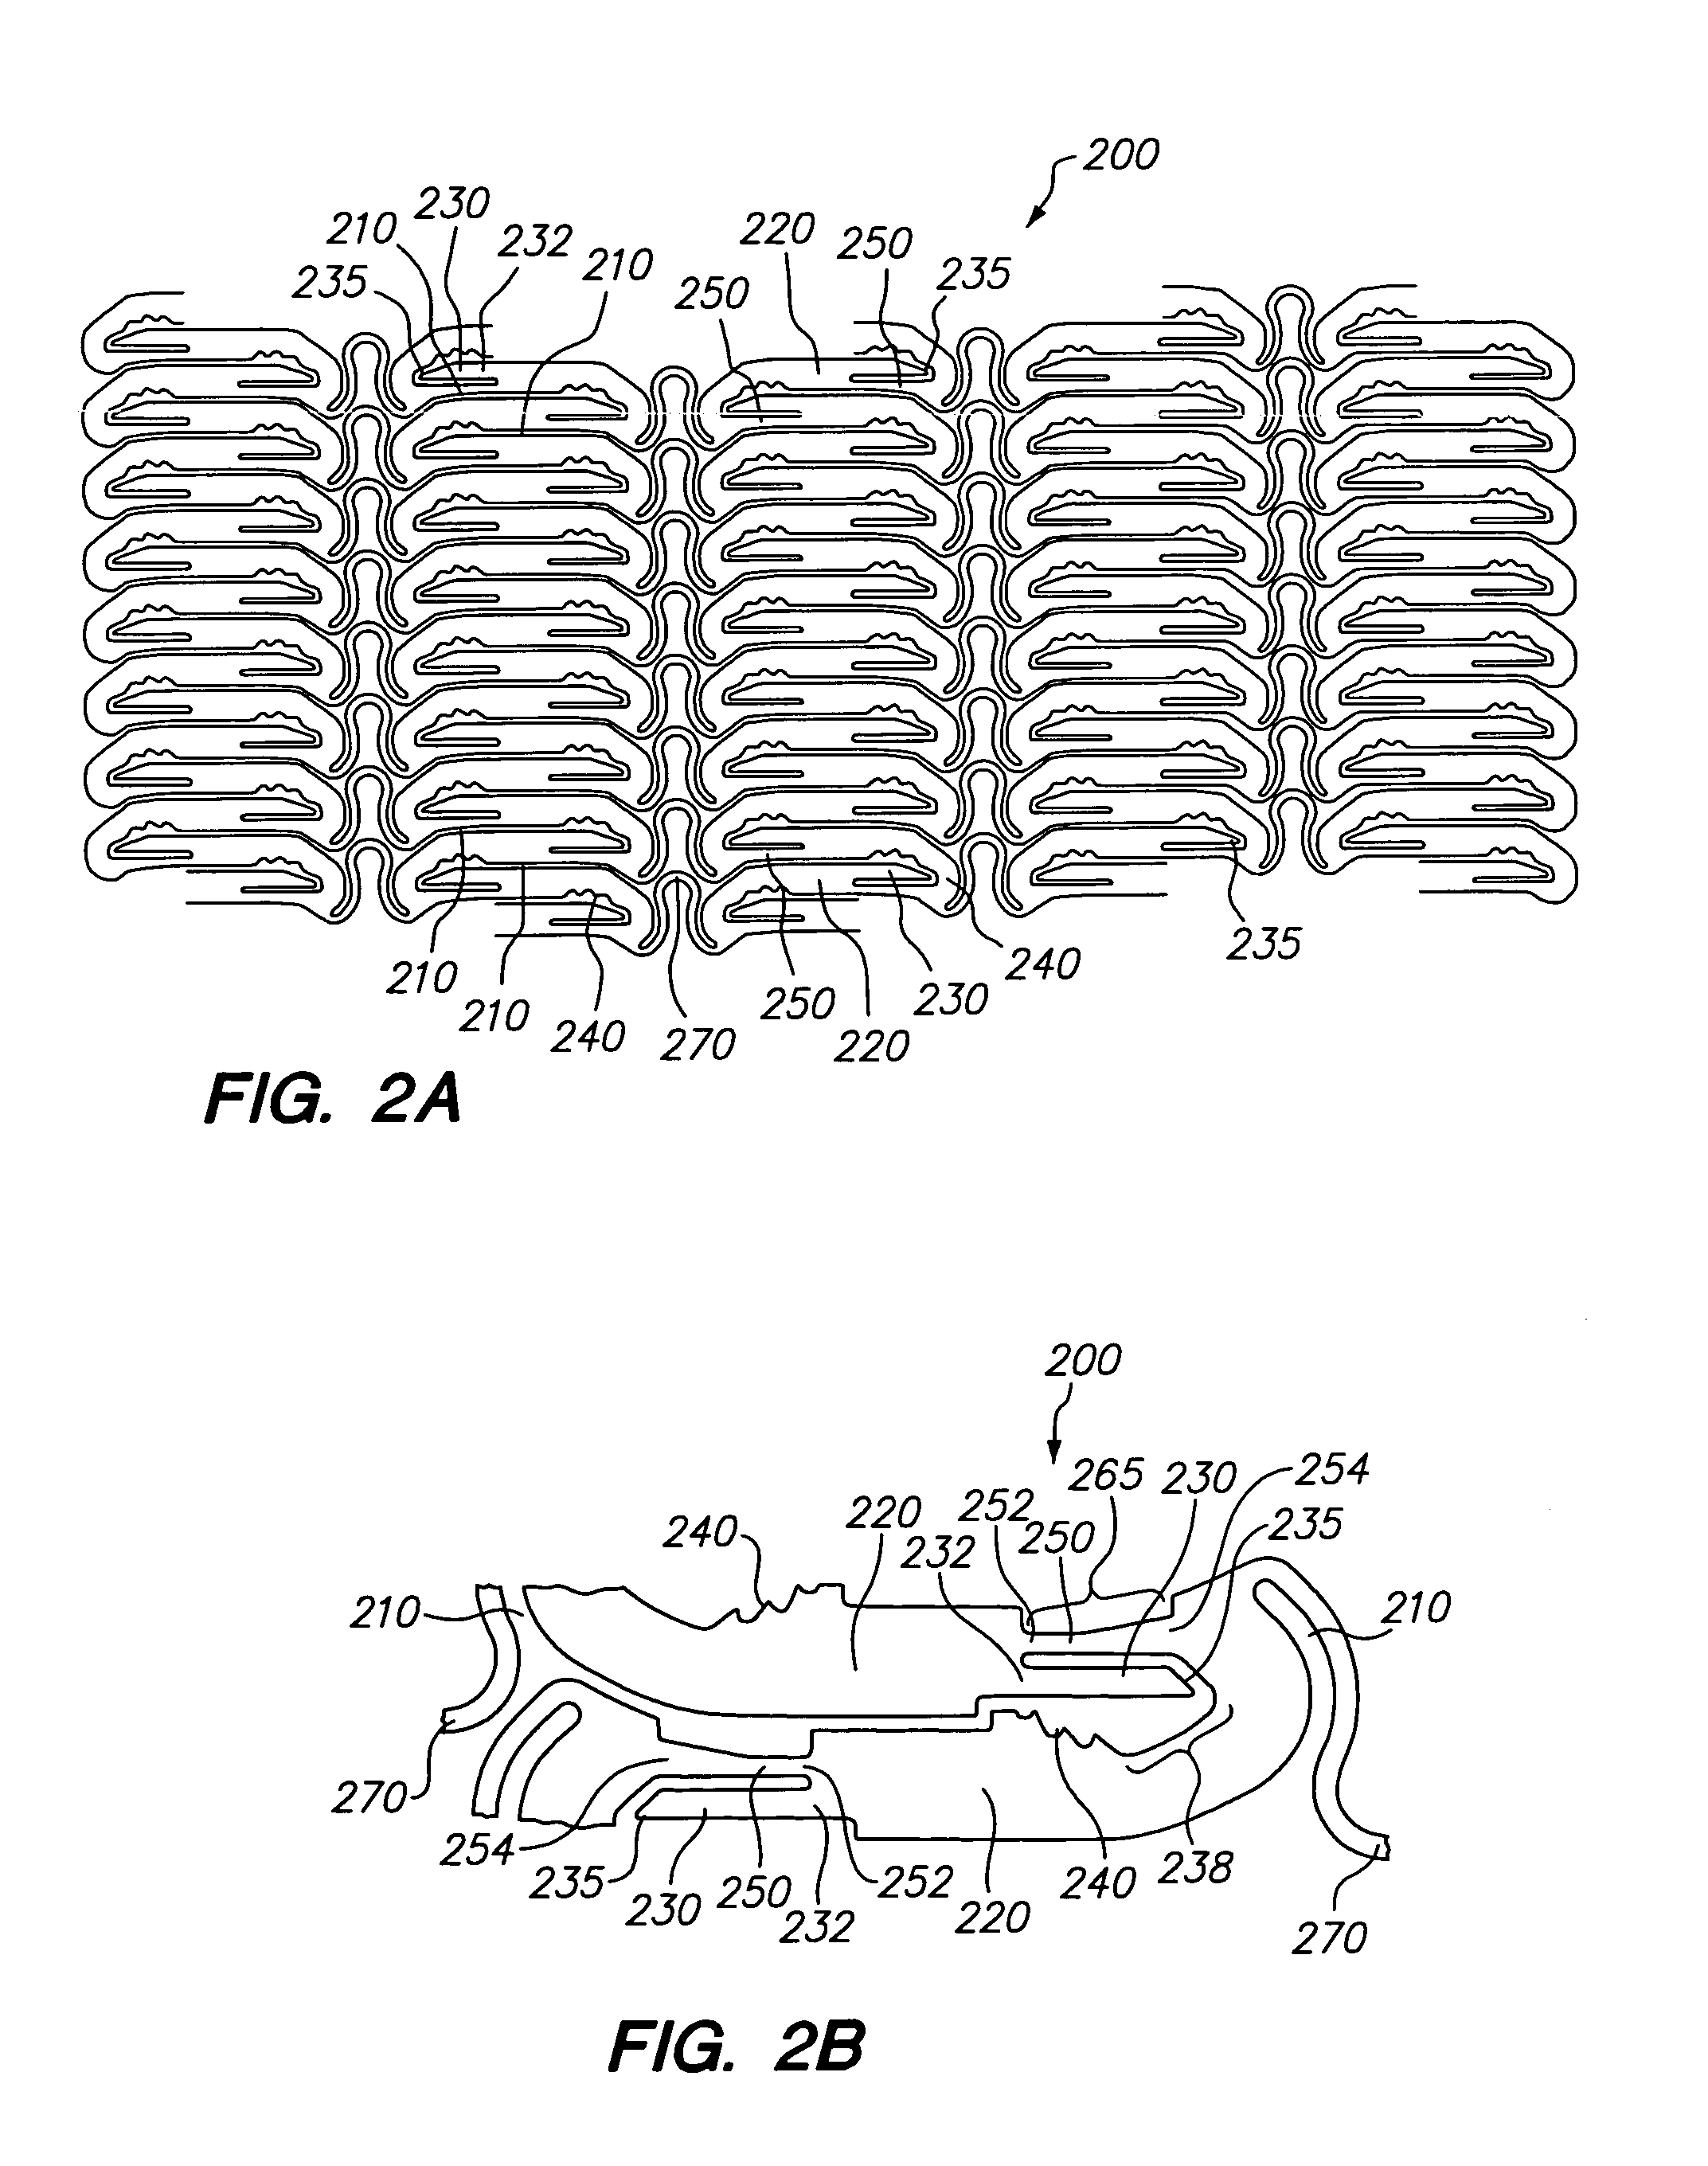 Expandable medical device with tapered hinge